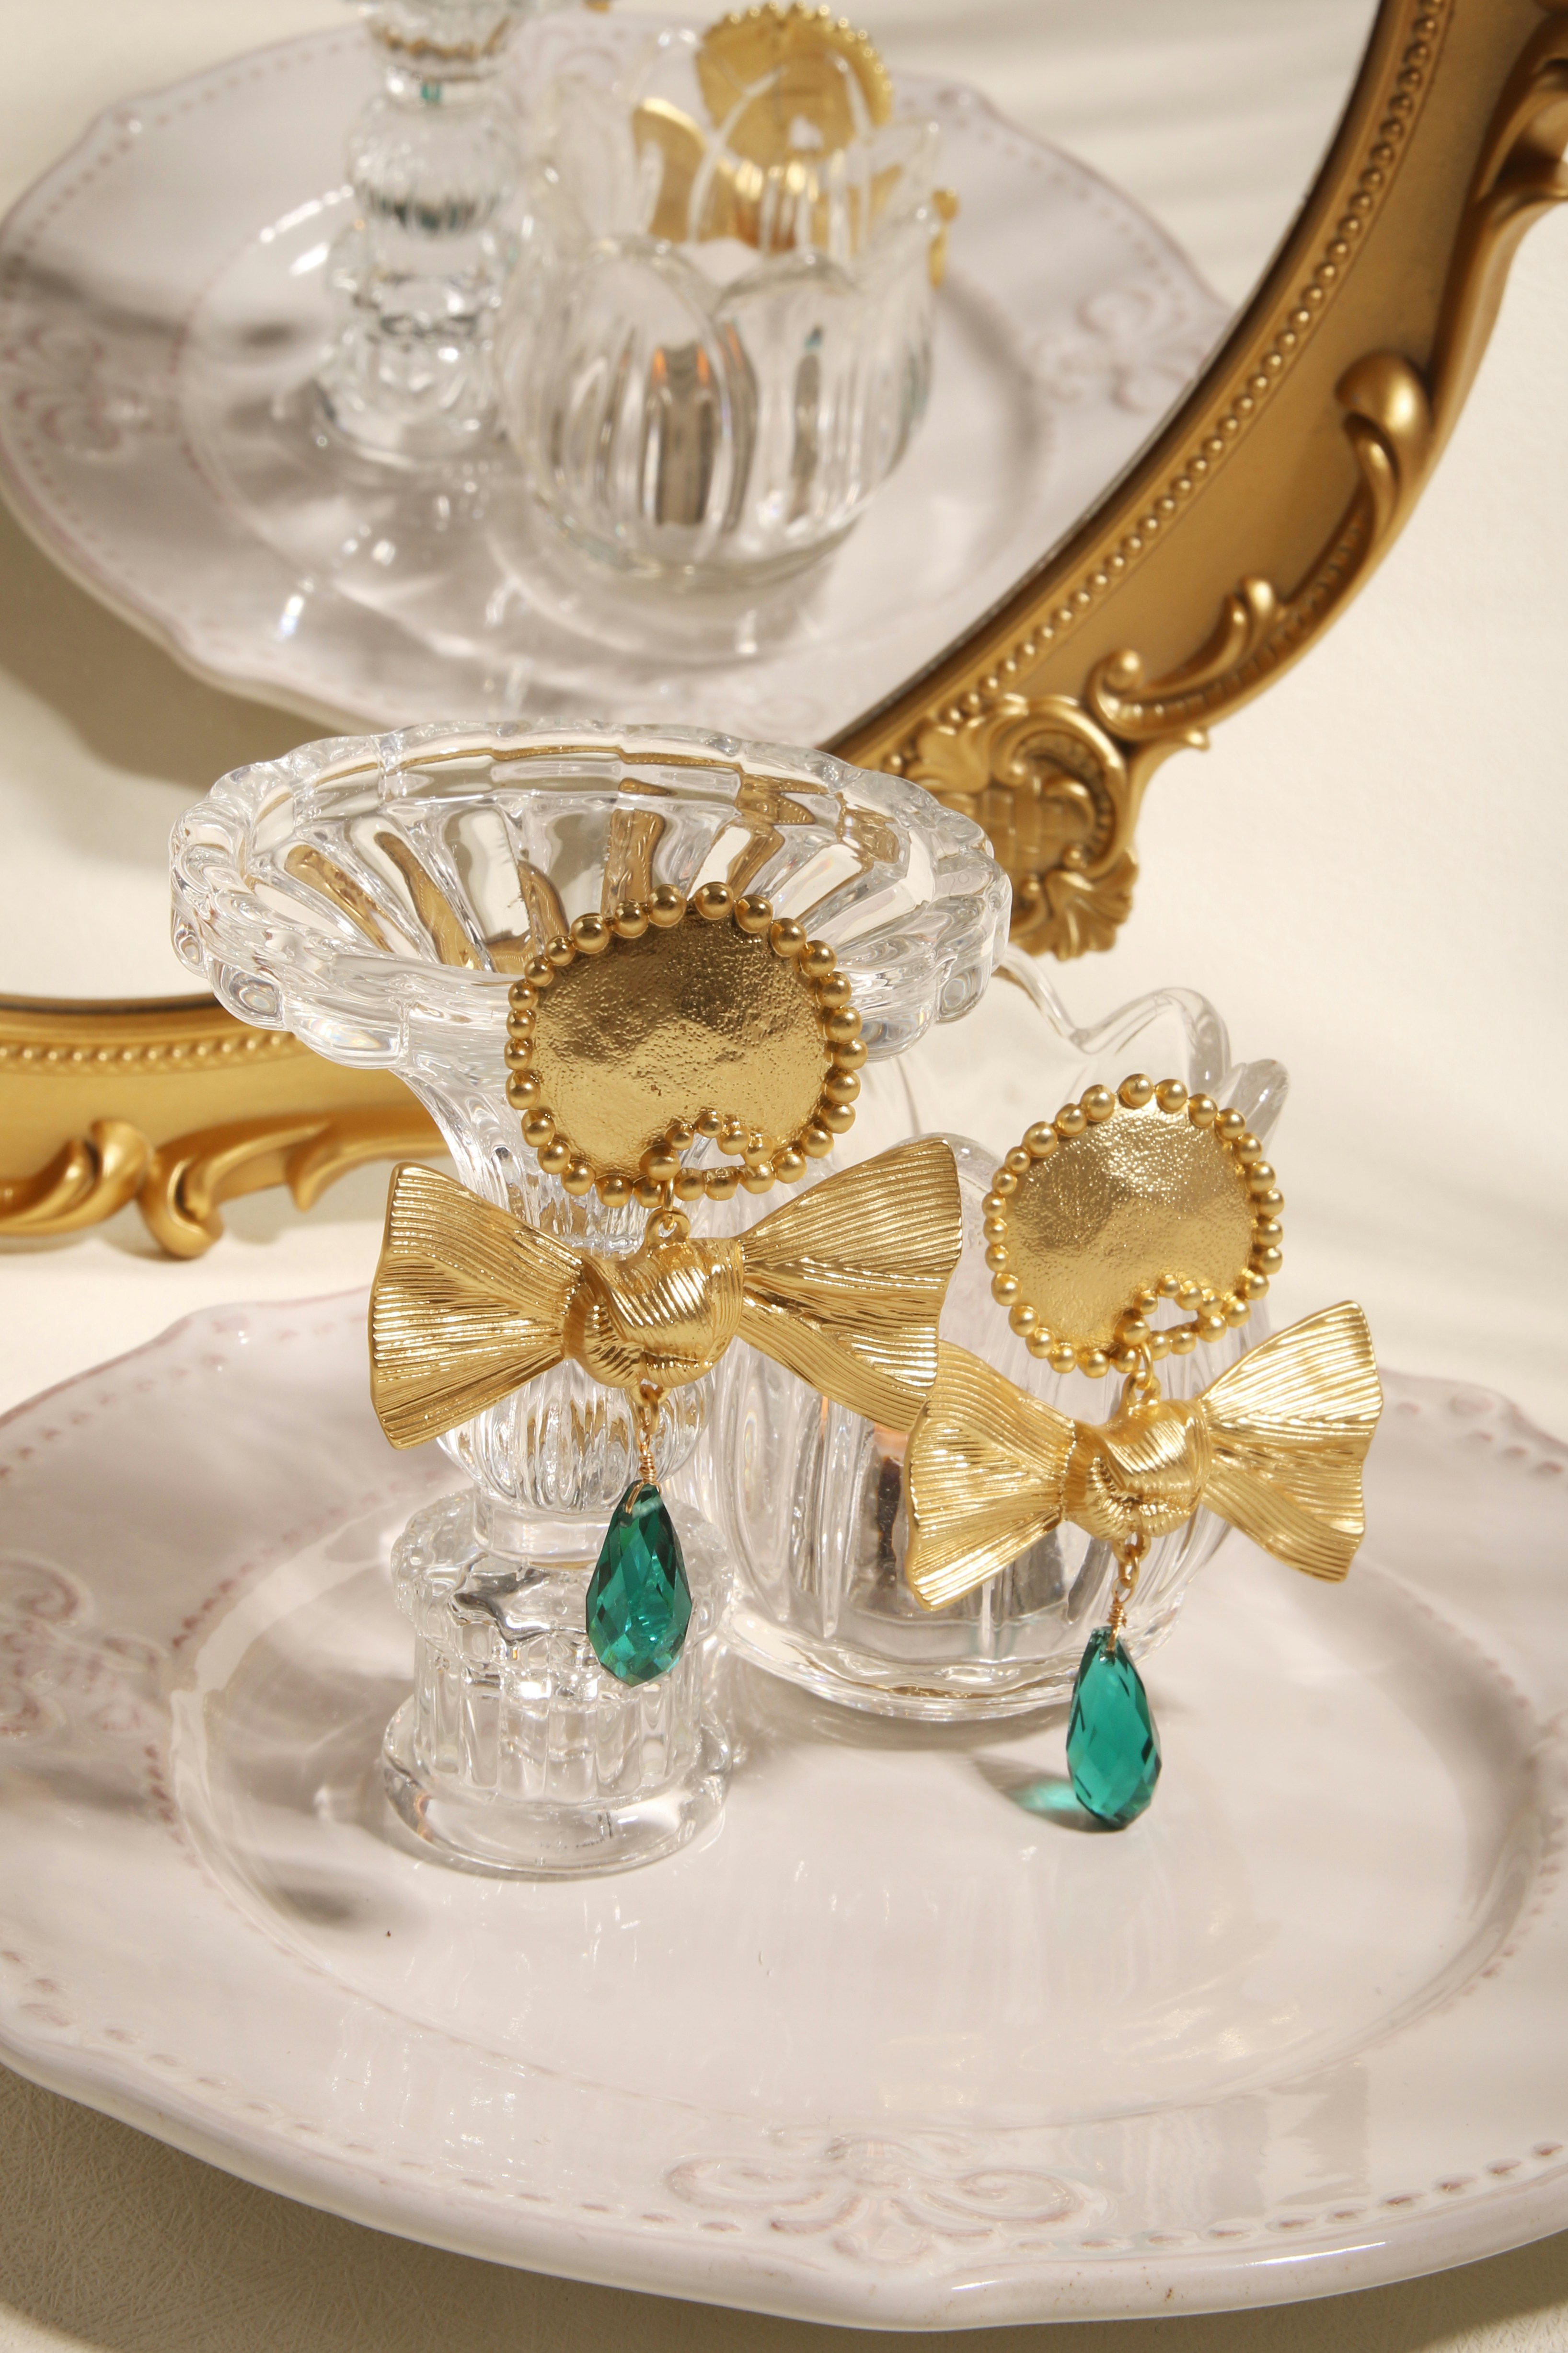 The best vintage jewelry is an ideal way to mindfully bring new items into your wardrobe.